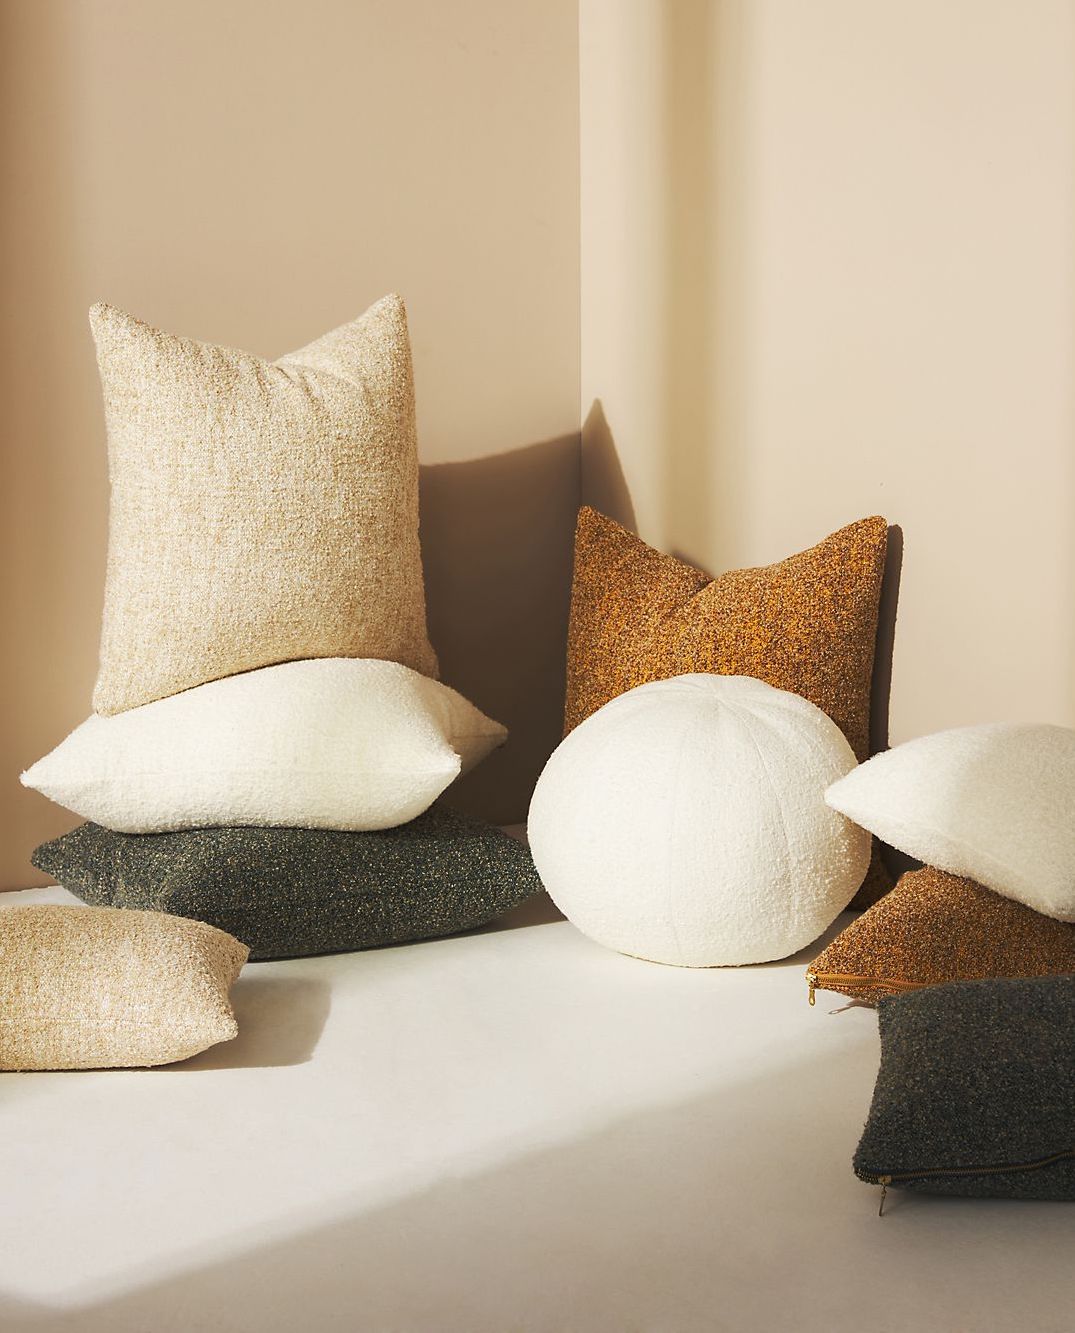 9 Cozy Throw Pillows for Snuggly Winter Comfort